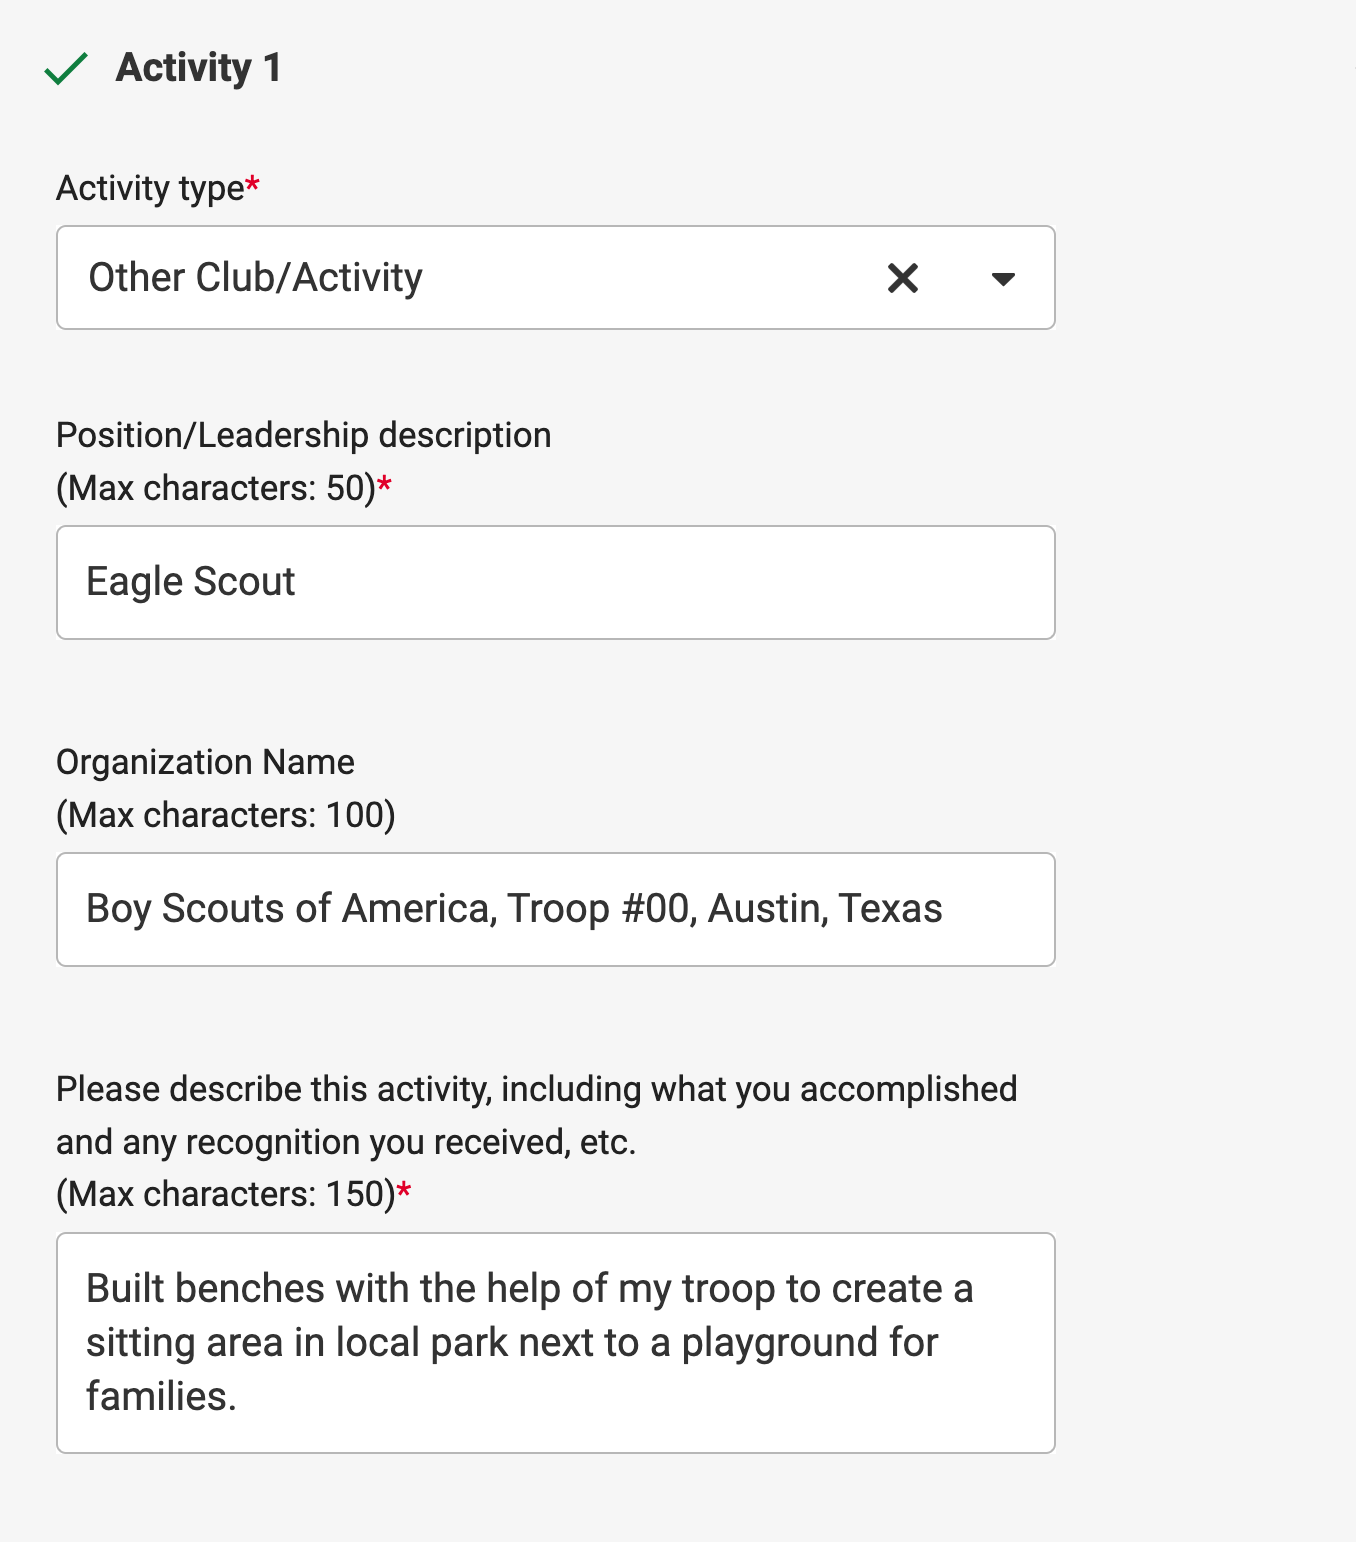 Activity example 1: Activity type: Other Club/Activity. Position: Eagle Scout. Organization Name: Boy Scouts of America, Troop #00, Austin, Texas. Please describe this activity field: Build benches with the help of my troop to create a sitting area in local park next to playground for families.